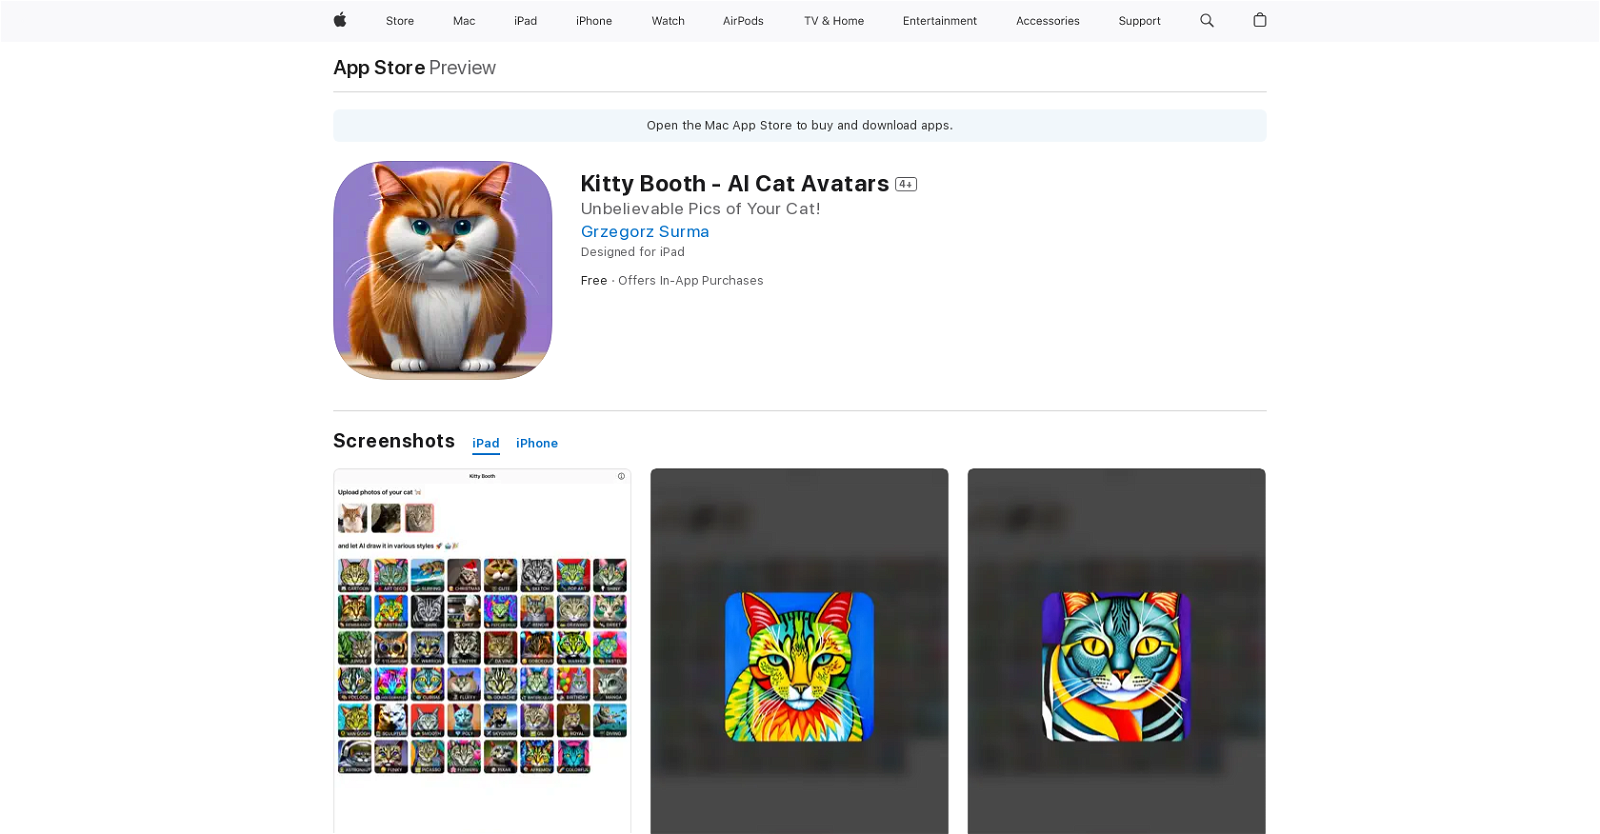 Kitty Booth website